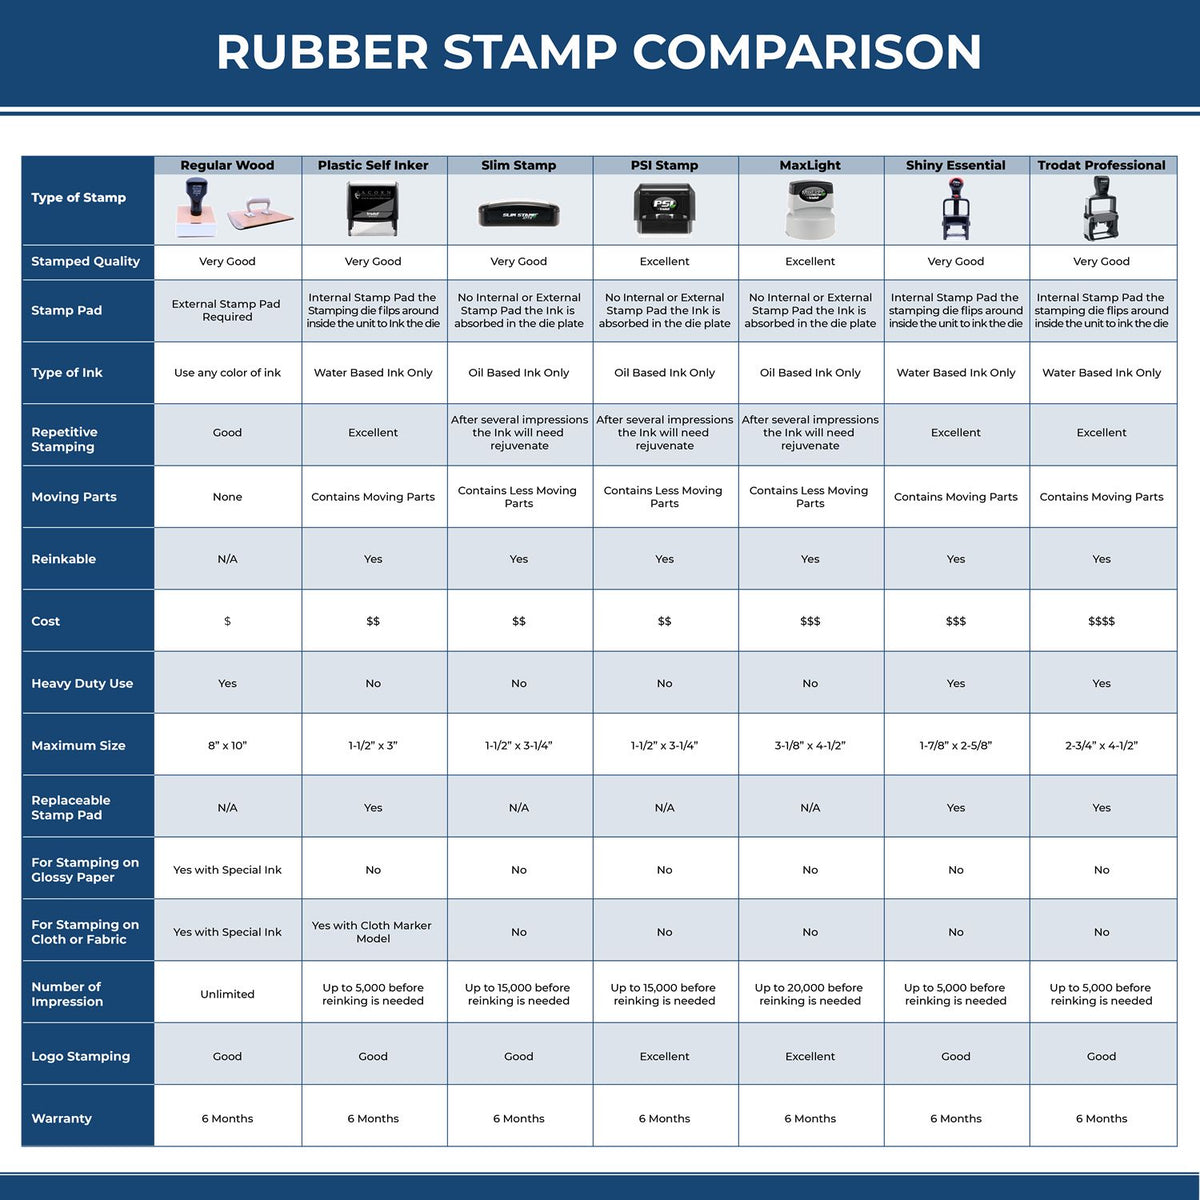 Large Paid with Box Rubber Stamp 4904R Rubber Stamp Comparison